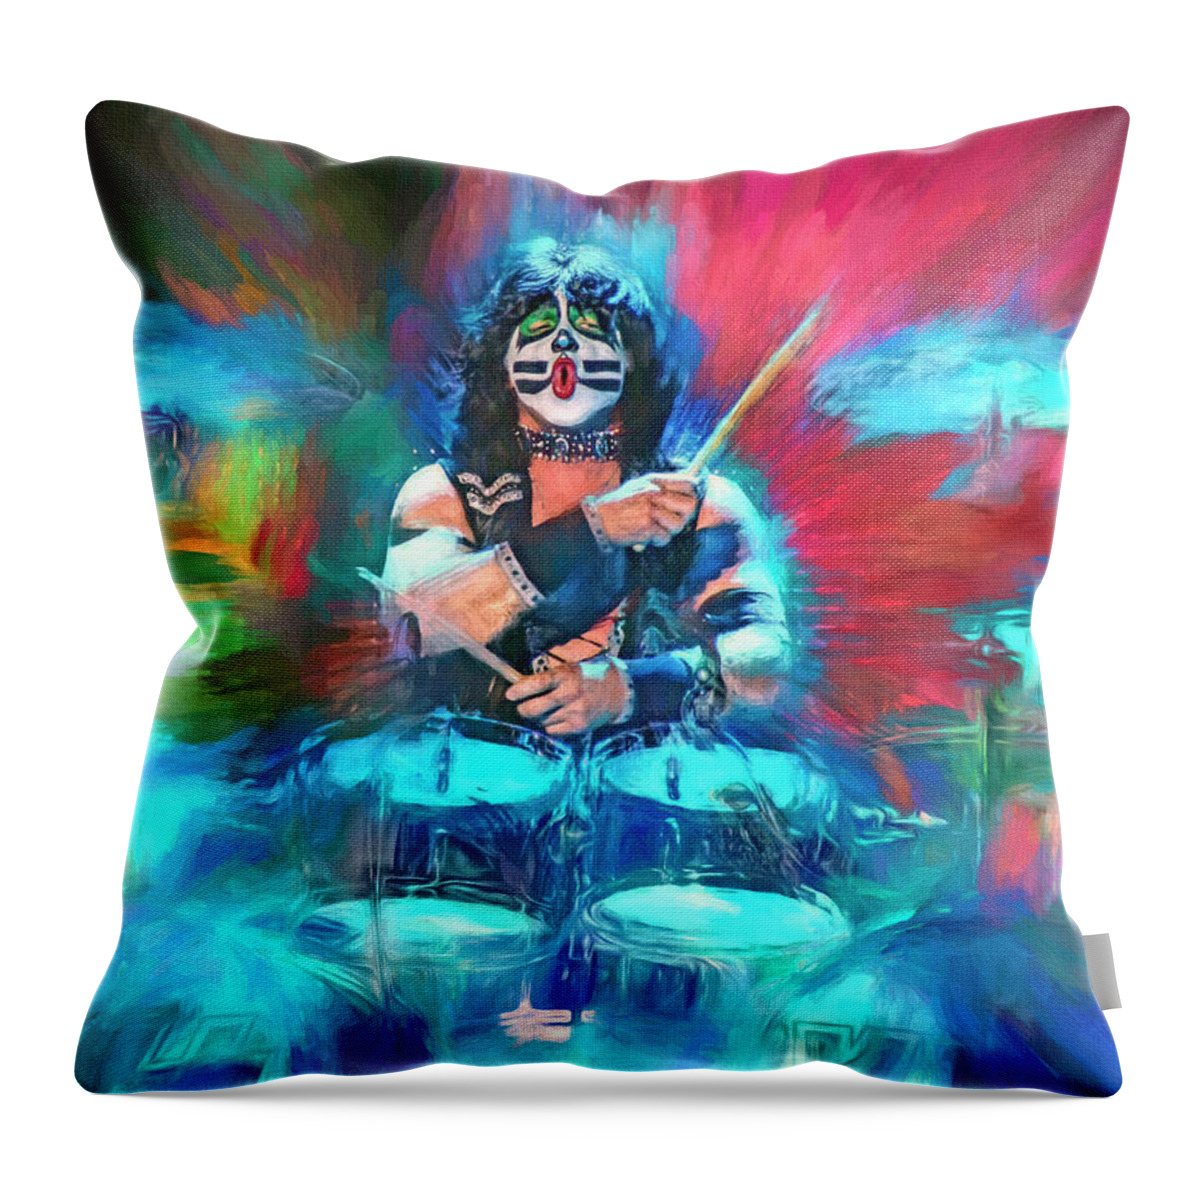 Kiss Throw Pillow featuring the mixed media Eric Singer Kiss by Mal Bray